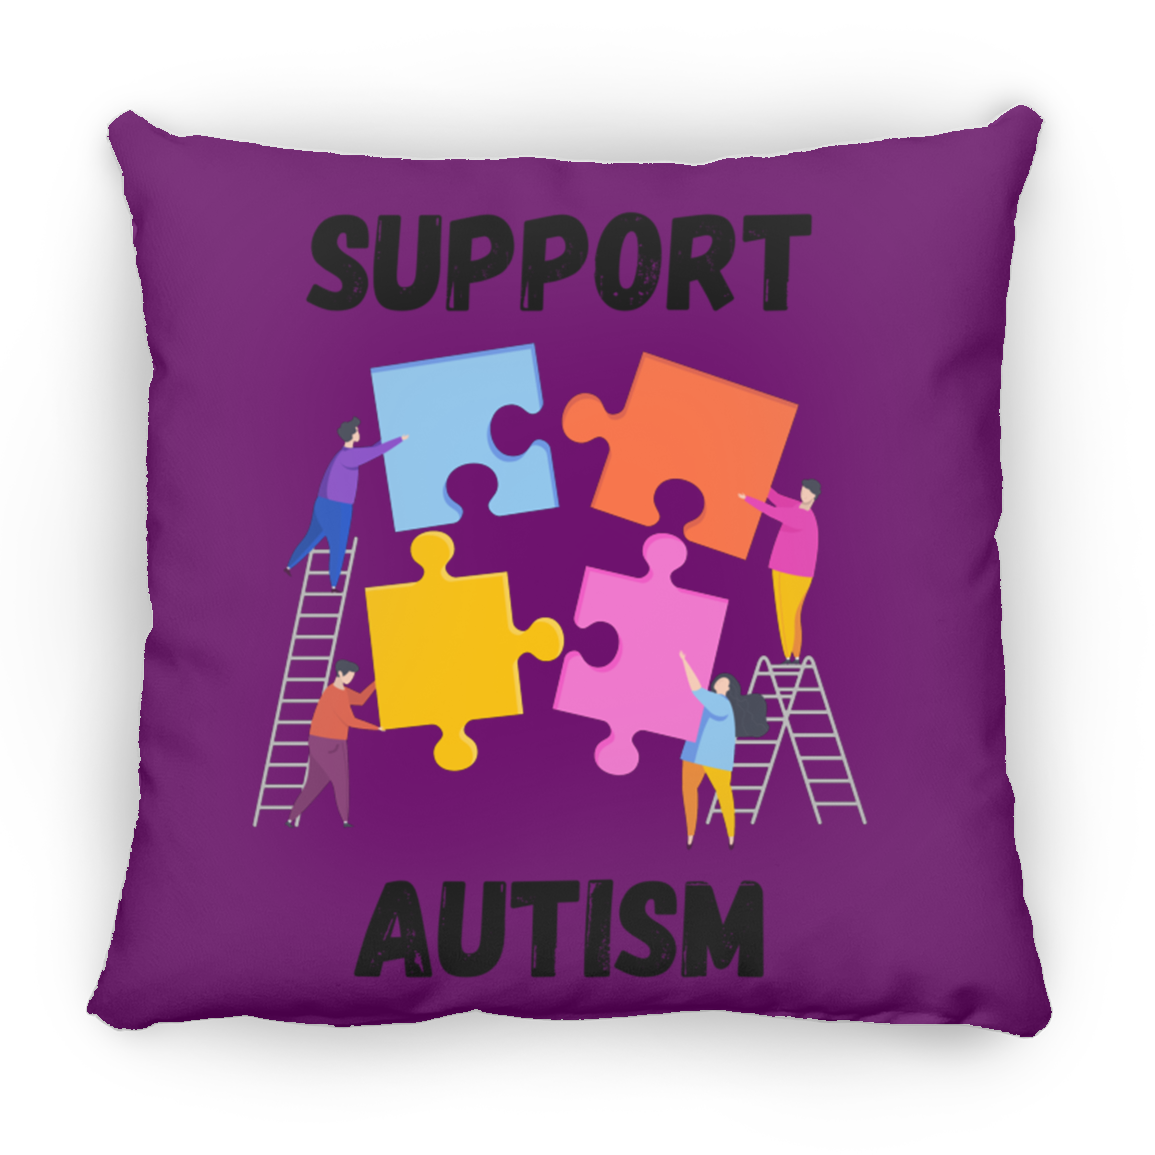 Support Autism Square Pillow